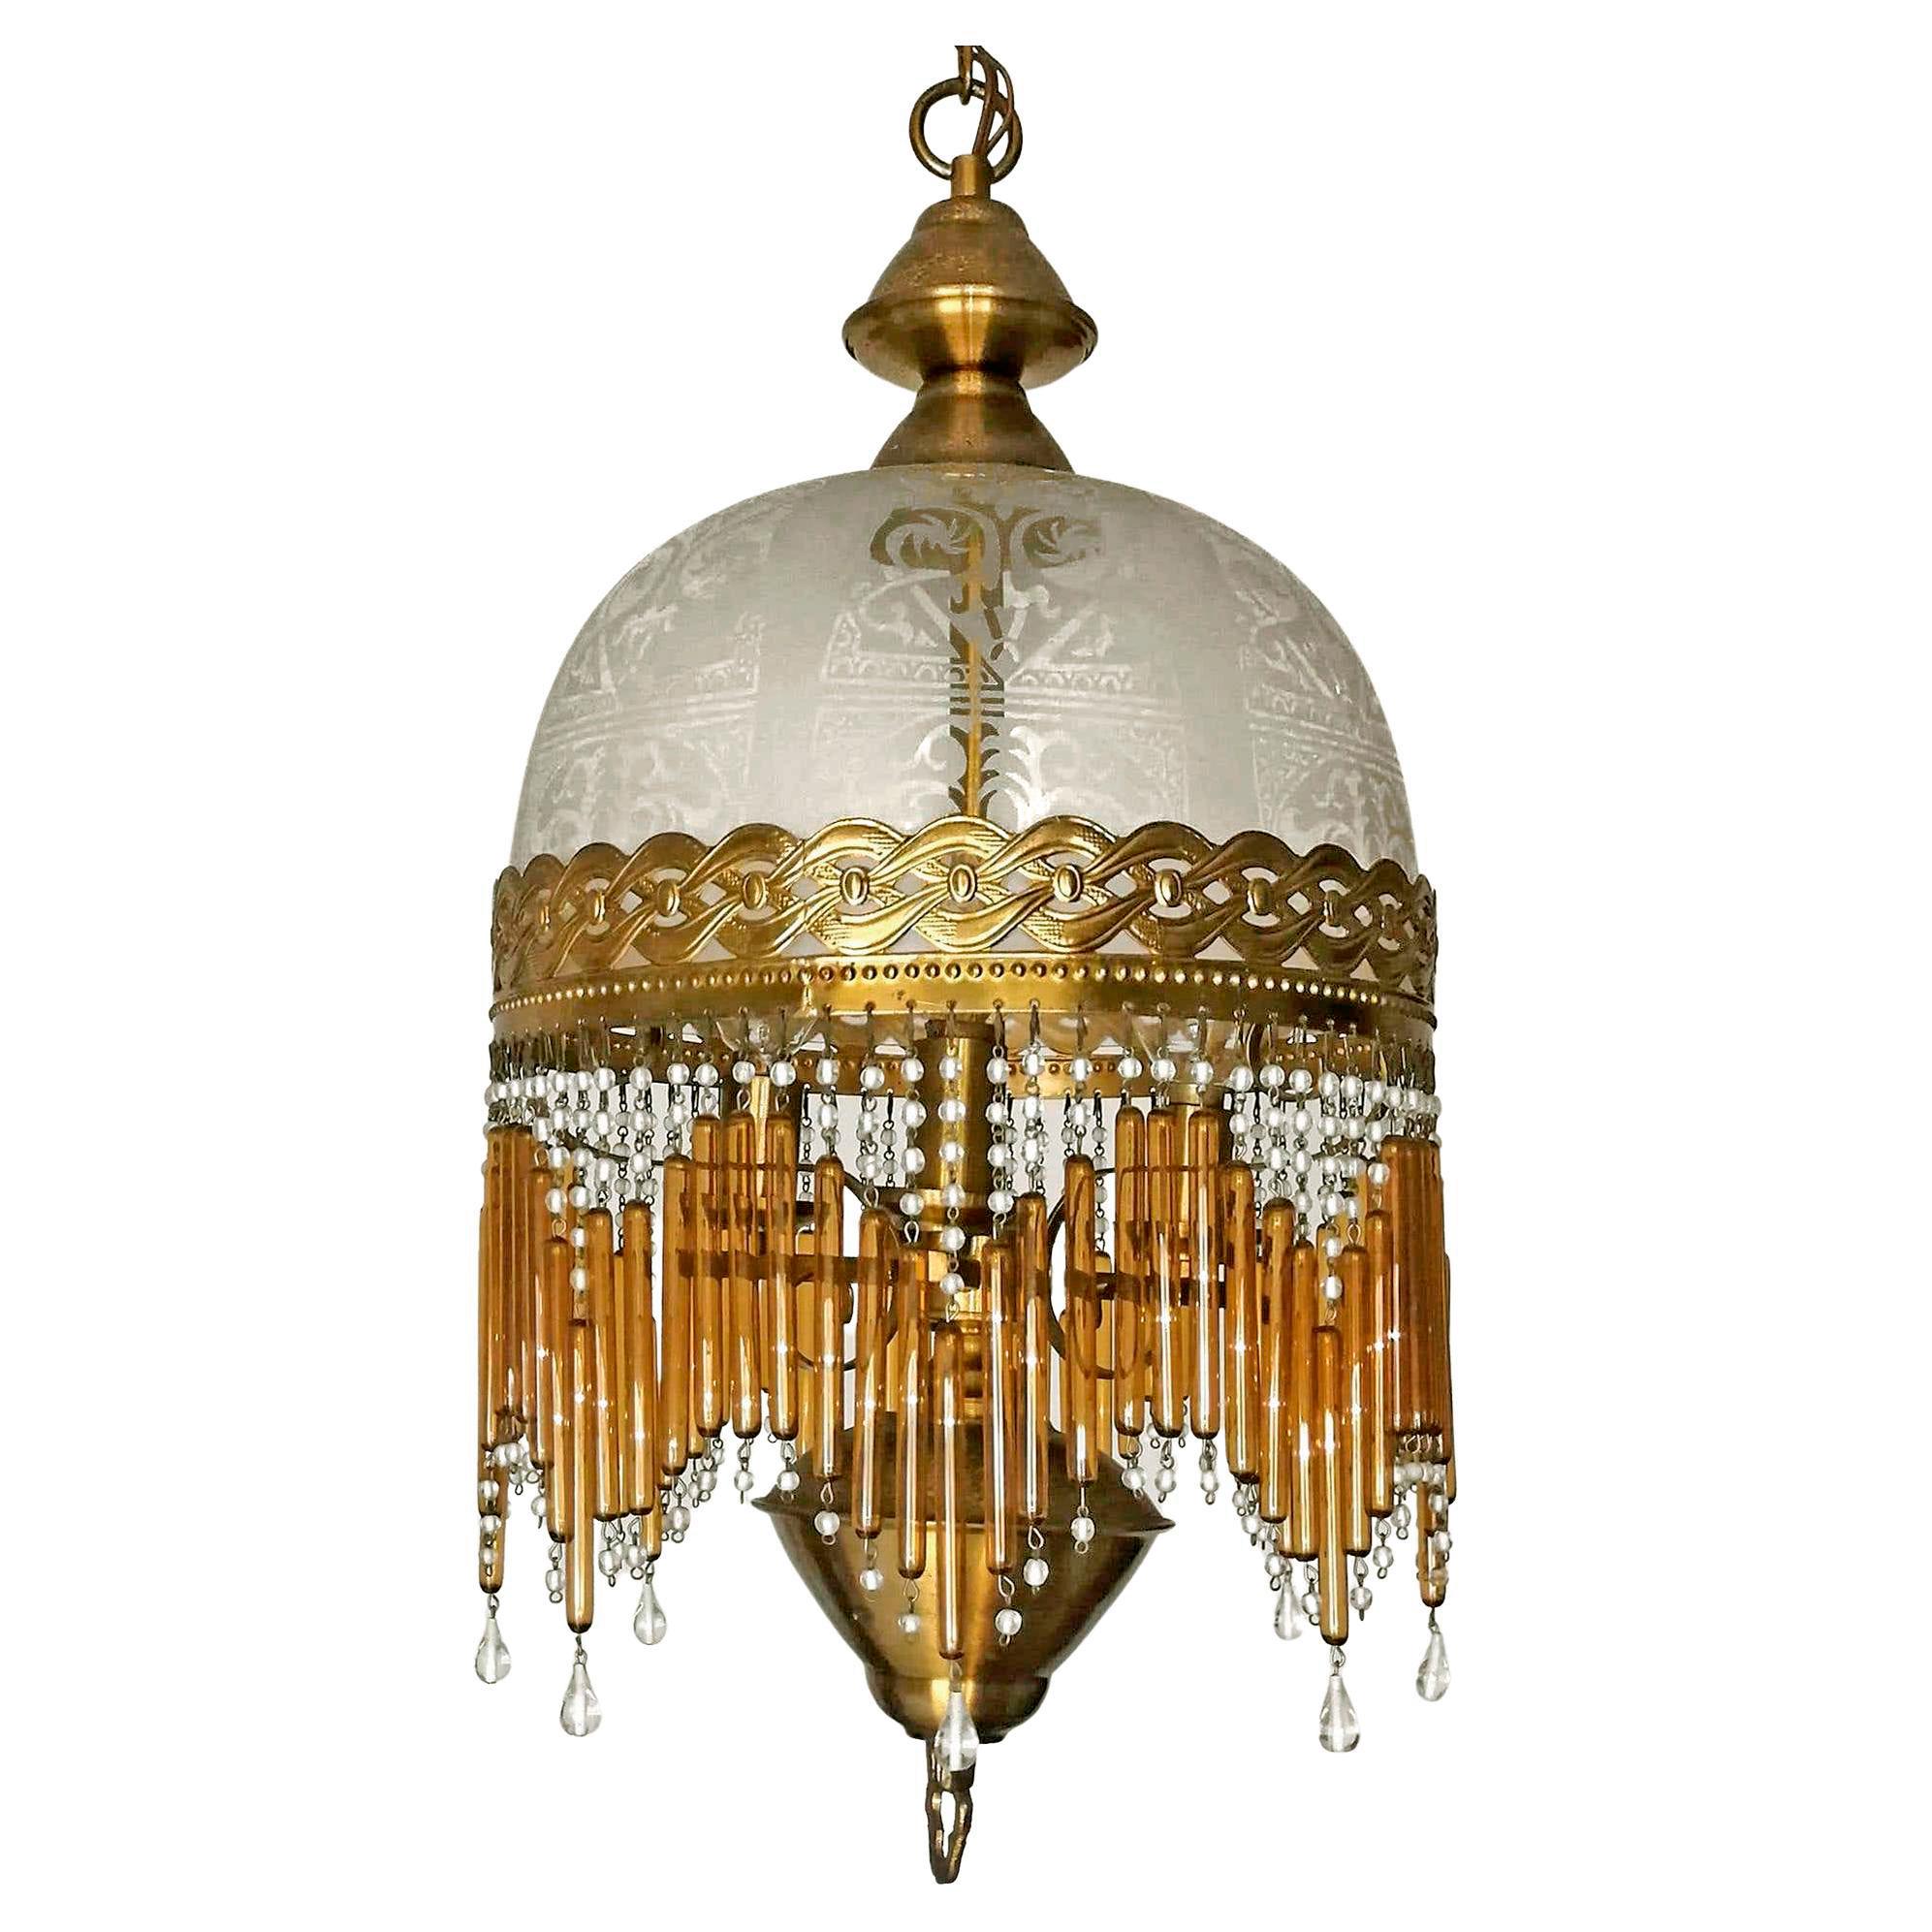 Beautiful Italian midcentury in clear and amber Murano beaded glass Art Deco / Art Nouveau chandelier.
Measures:
Diameter 11 in/28 cm
Height 35.5 in (chain/11 in)/ 90 cm (chain/28 cm)
3-light bulbs E14/ good working condition.
Age